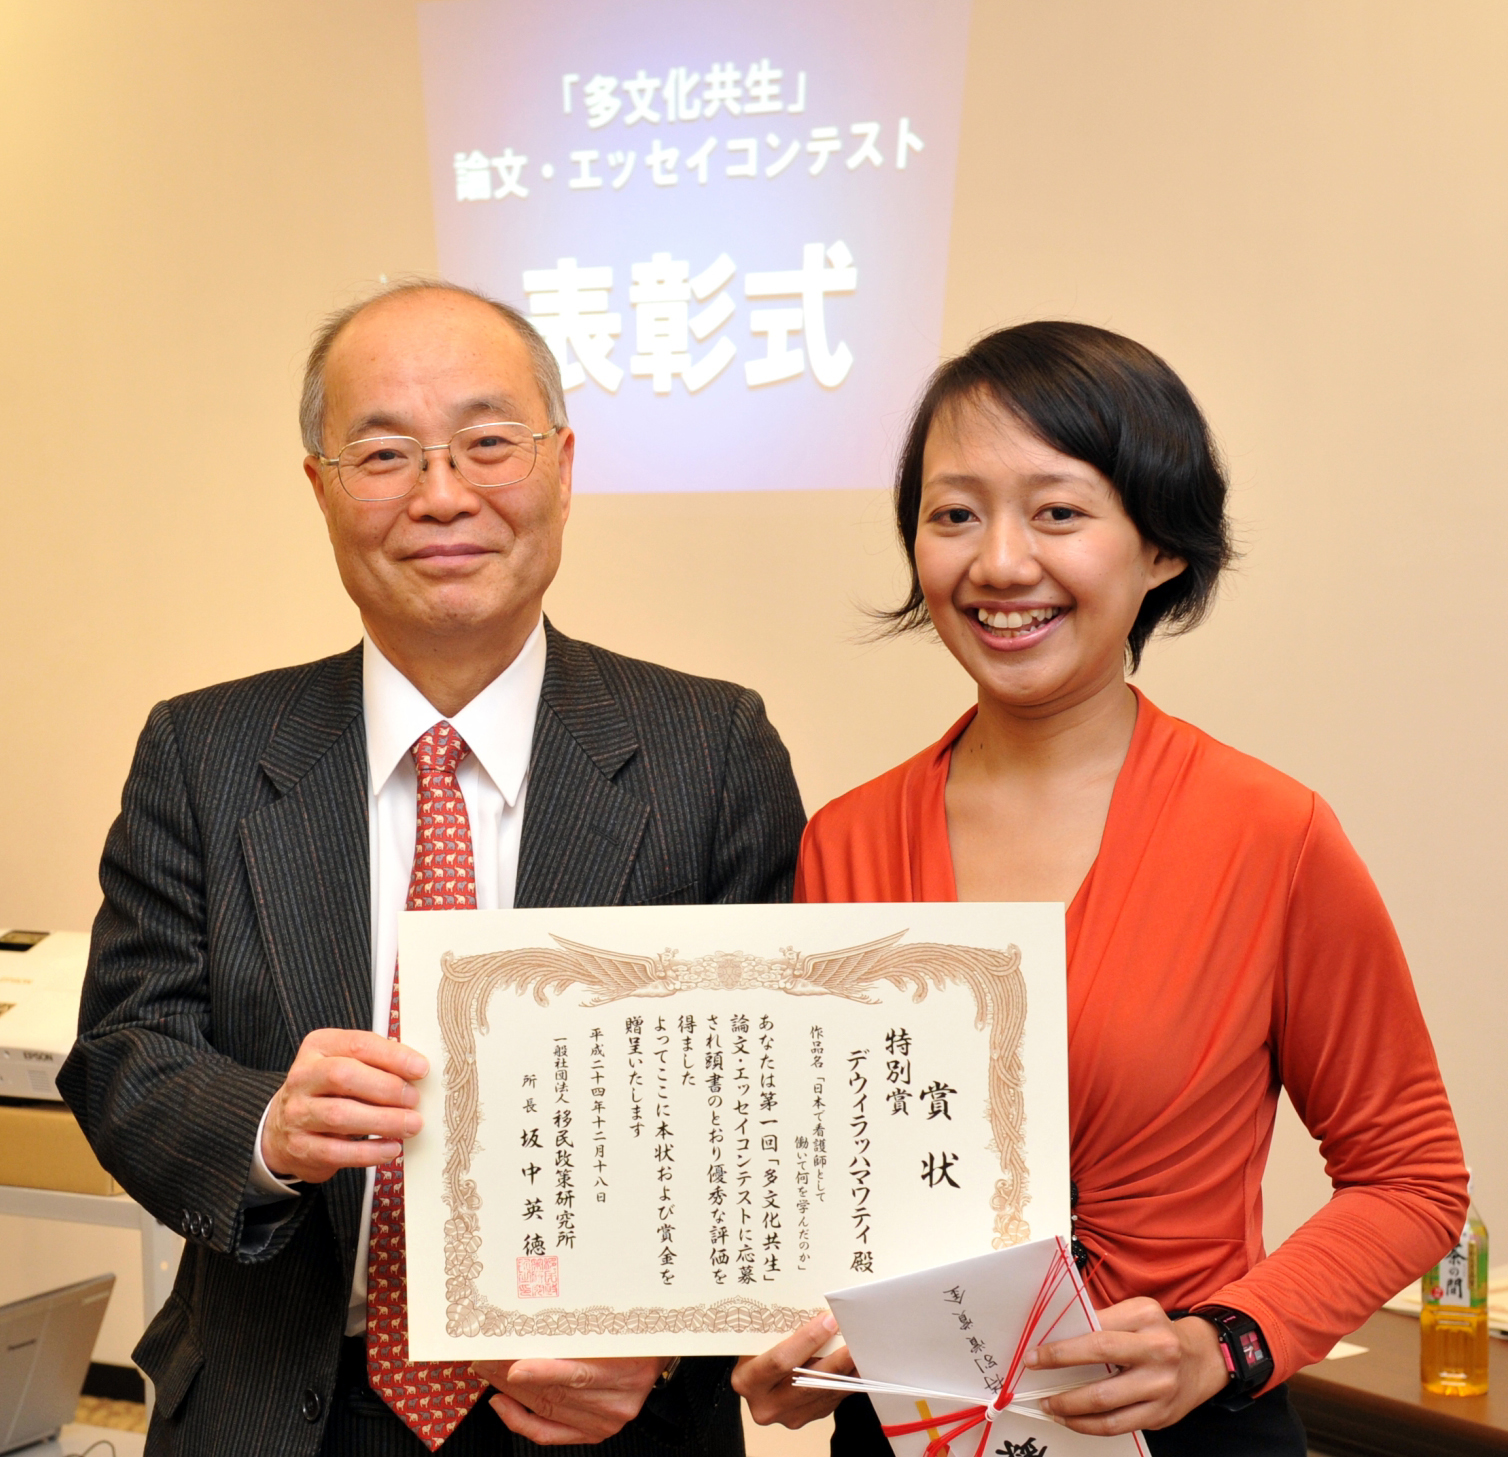 First steps: At an event in January 2013, former Tokyo Immigration Bureau chief Hidenori Sakanaka presents Indonesian Dewi Rachmawati with a prize for an essay she wrote about her struggle to become a nurse in Japan. | YOSHIAKI MIURA